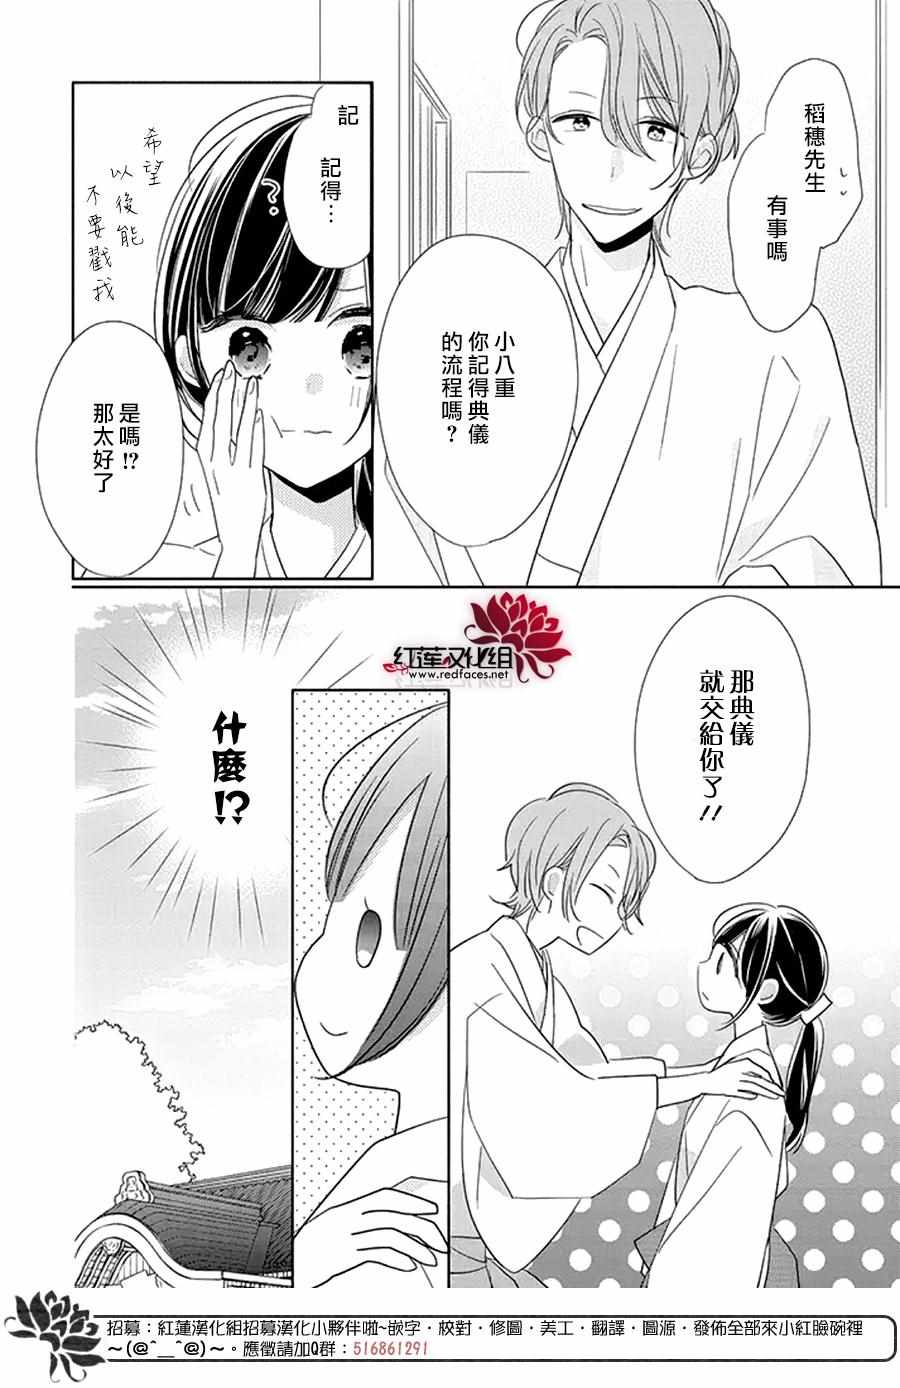 《If given a second chance》漫画 second chance 023集